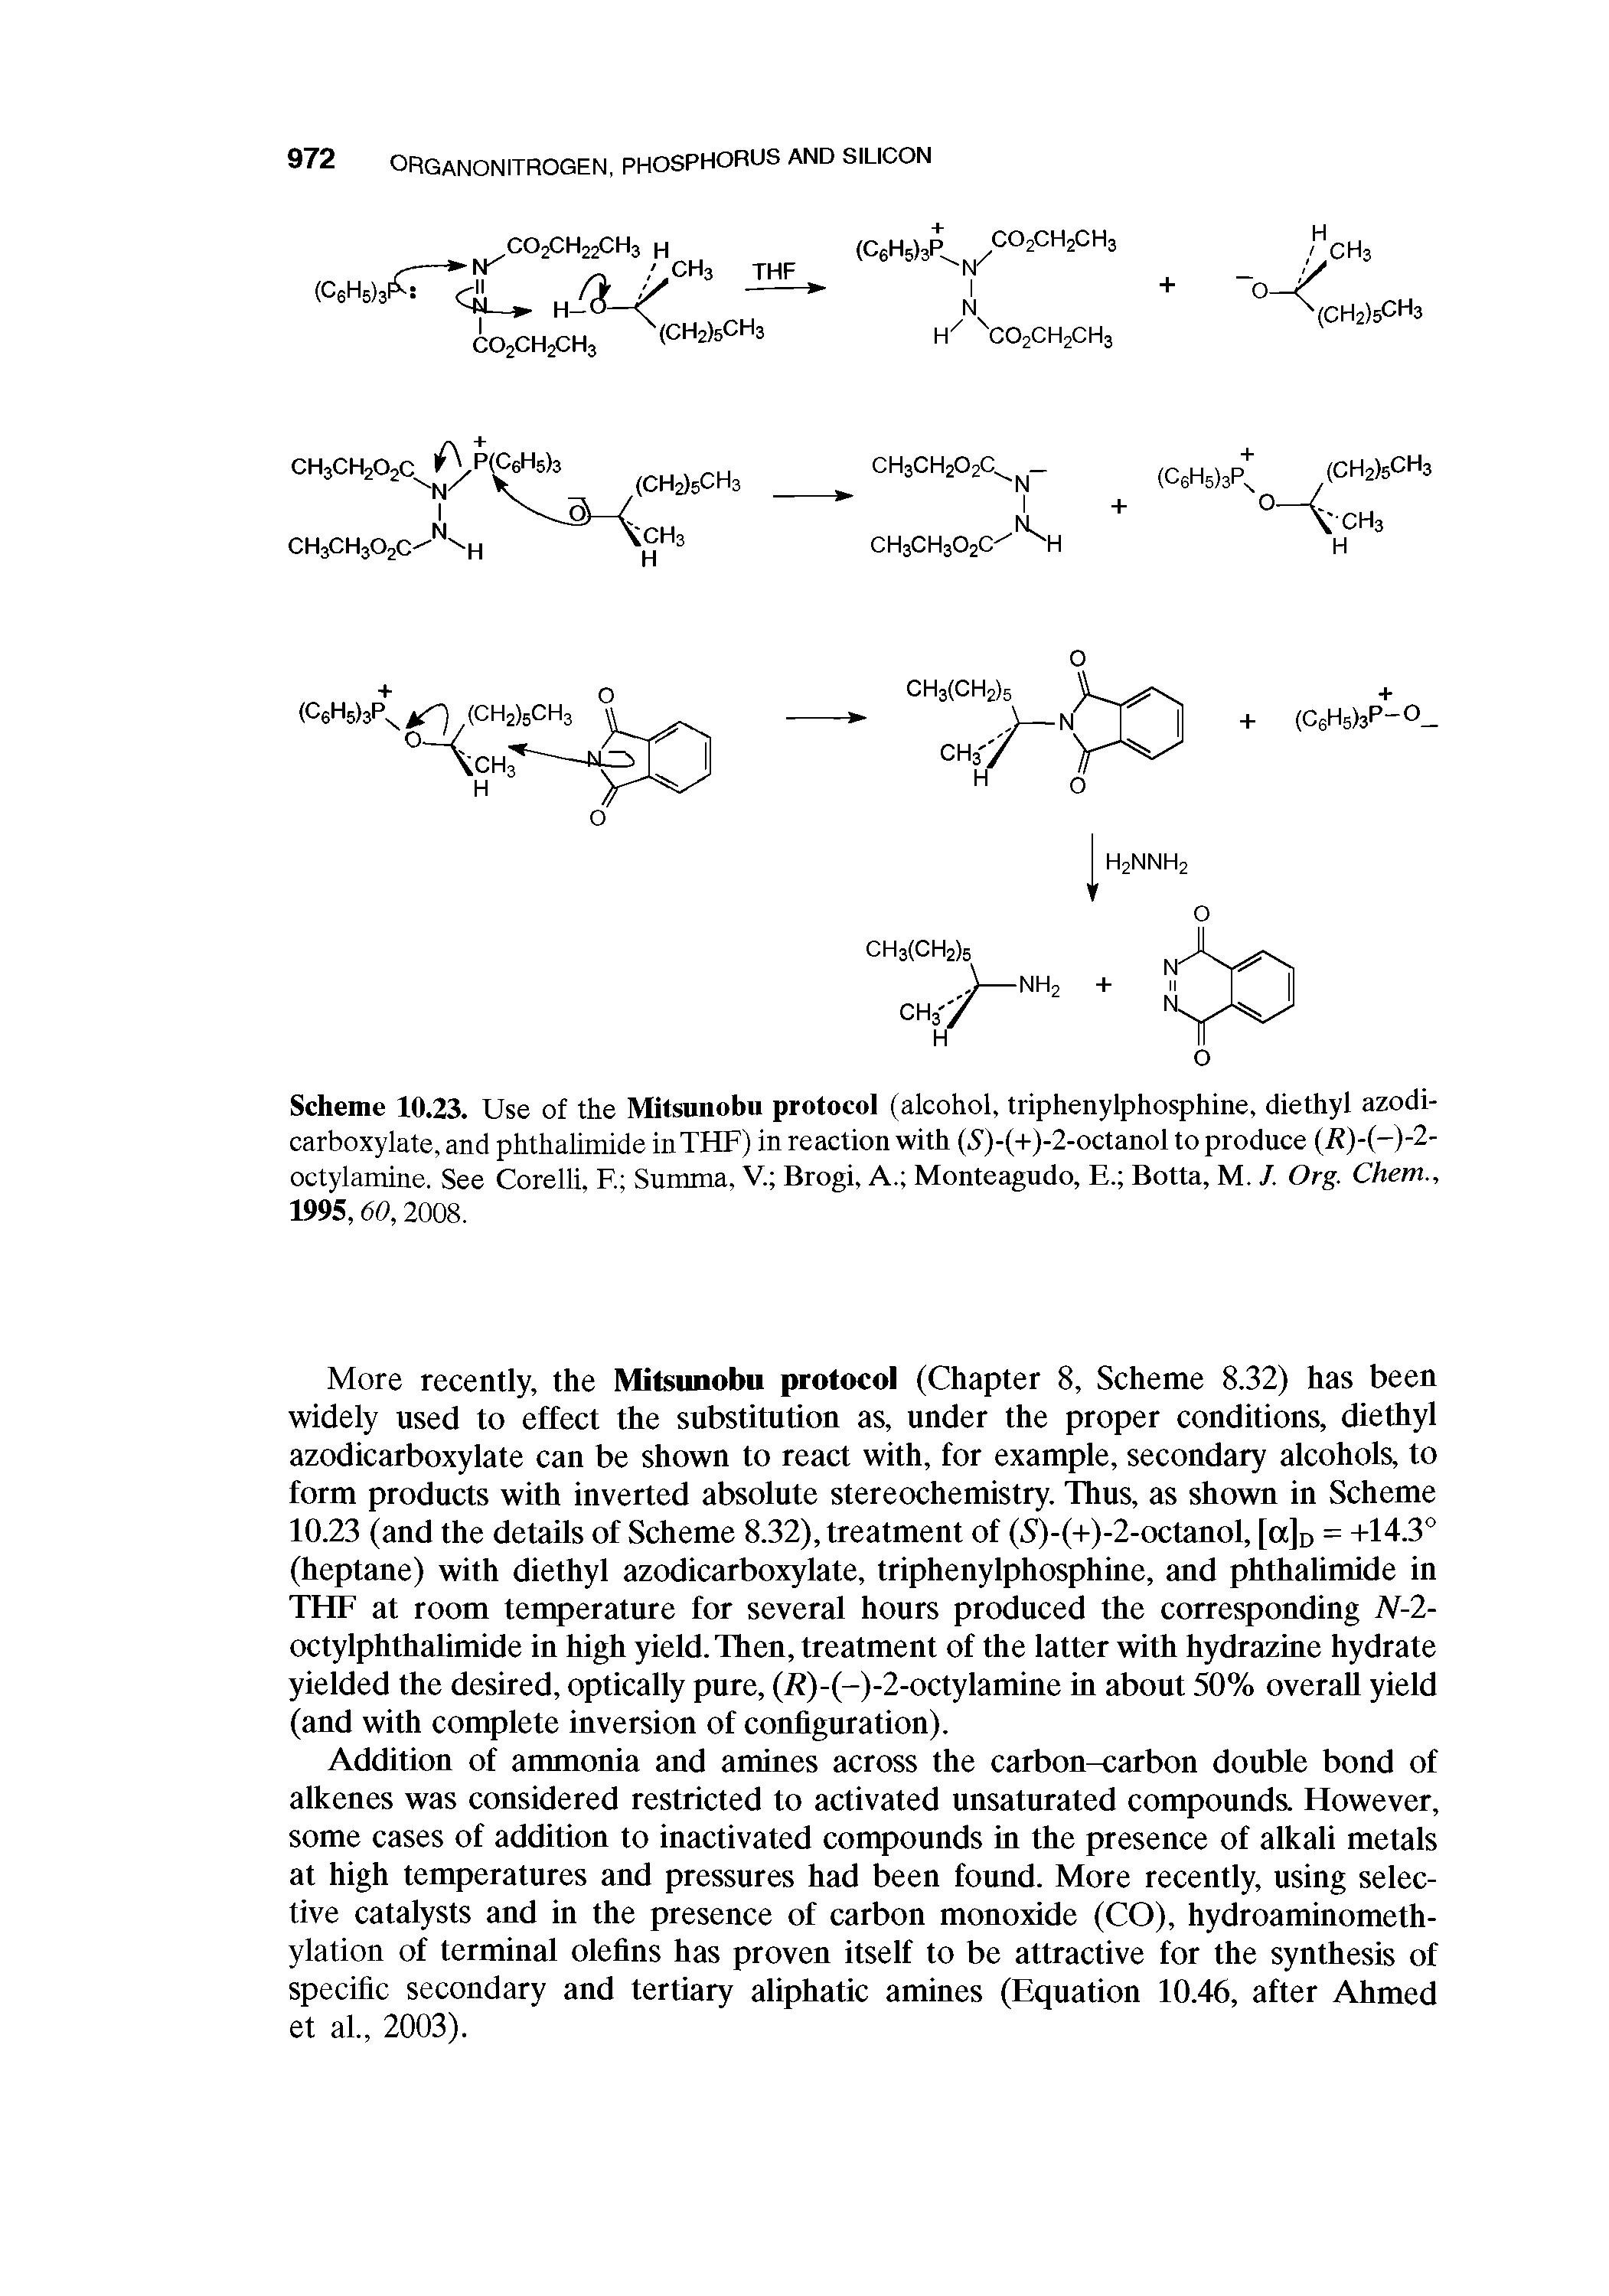 Scheme 10.23. Use of the Mitsunobu protocol (alcohol, triphenylphosphine, diethyl azodi-carboxylate, and phthalimide in THF) in reaction with (5)-(+)-2-octanol to produce (R)-(-)-2-octylamine. See Corelli, F. Summa, V. Brogi, A. Monteagudo, EBotta, M. J. Ore. Chem., 1995,60,2008.